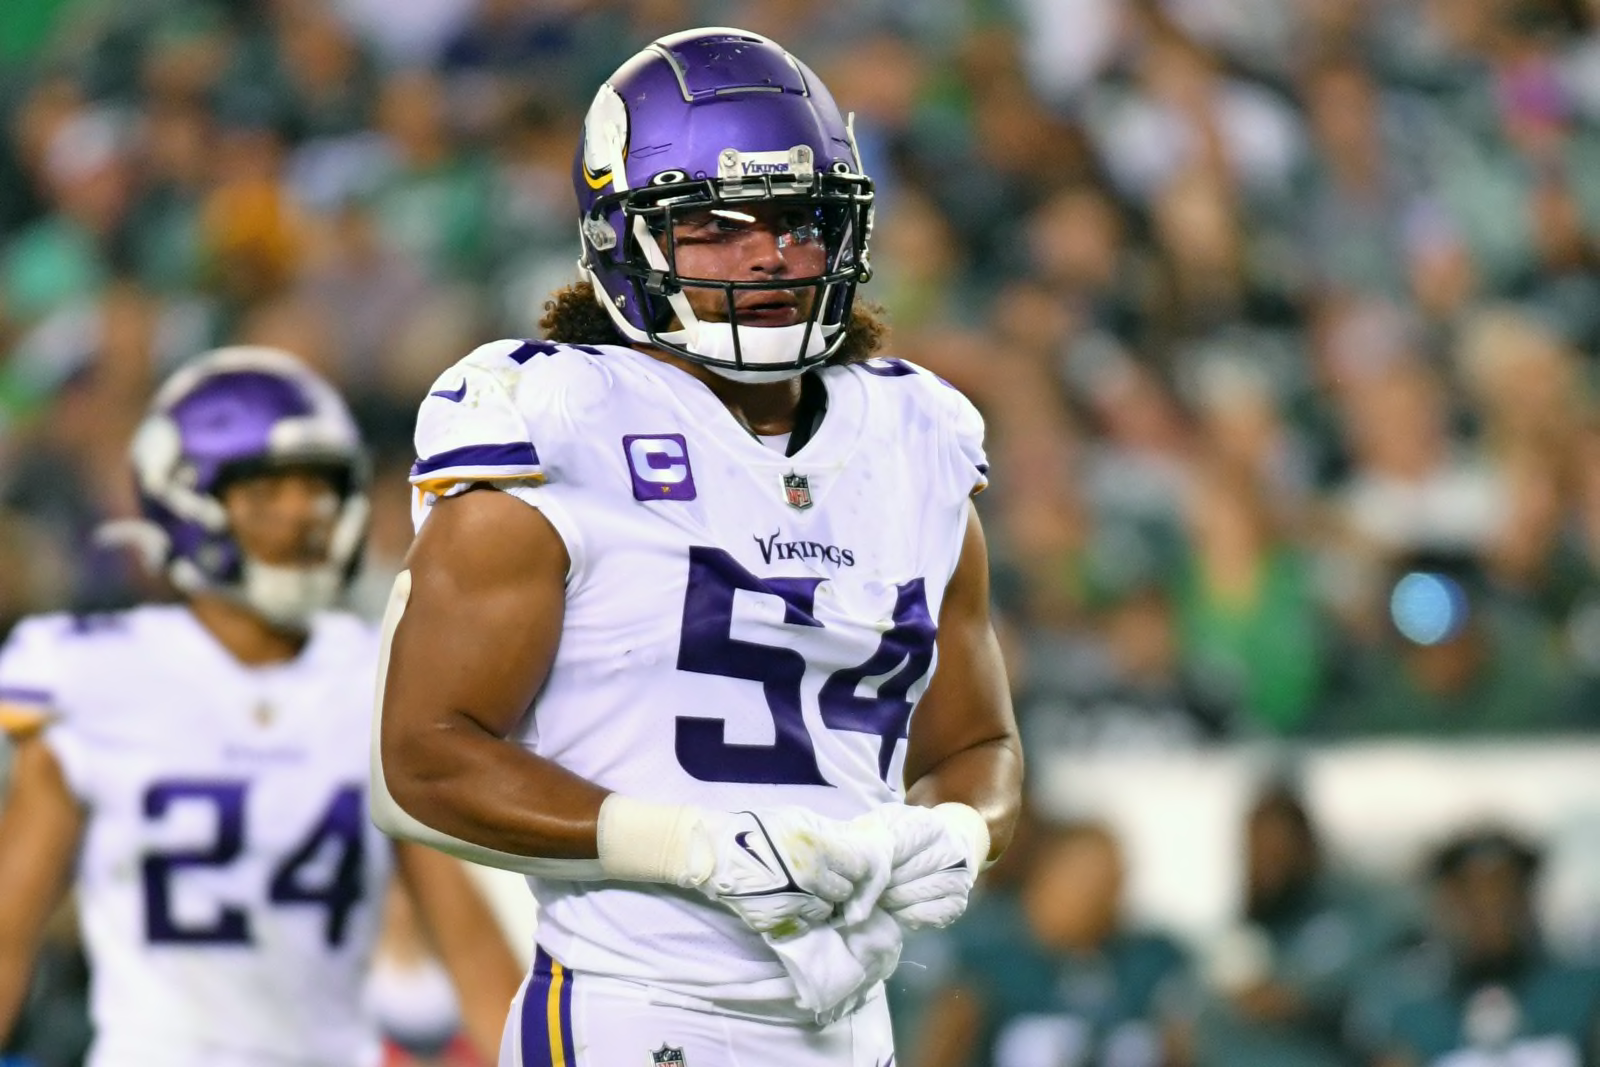 4 players that have had multiple stints with the Vikings